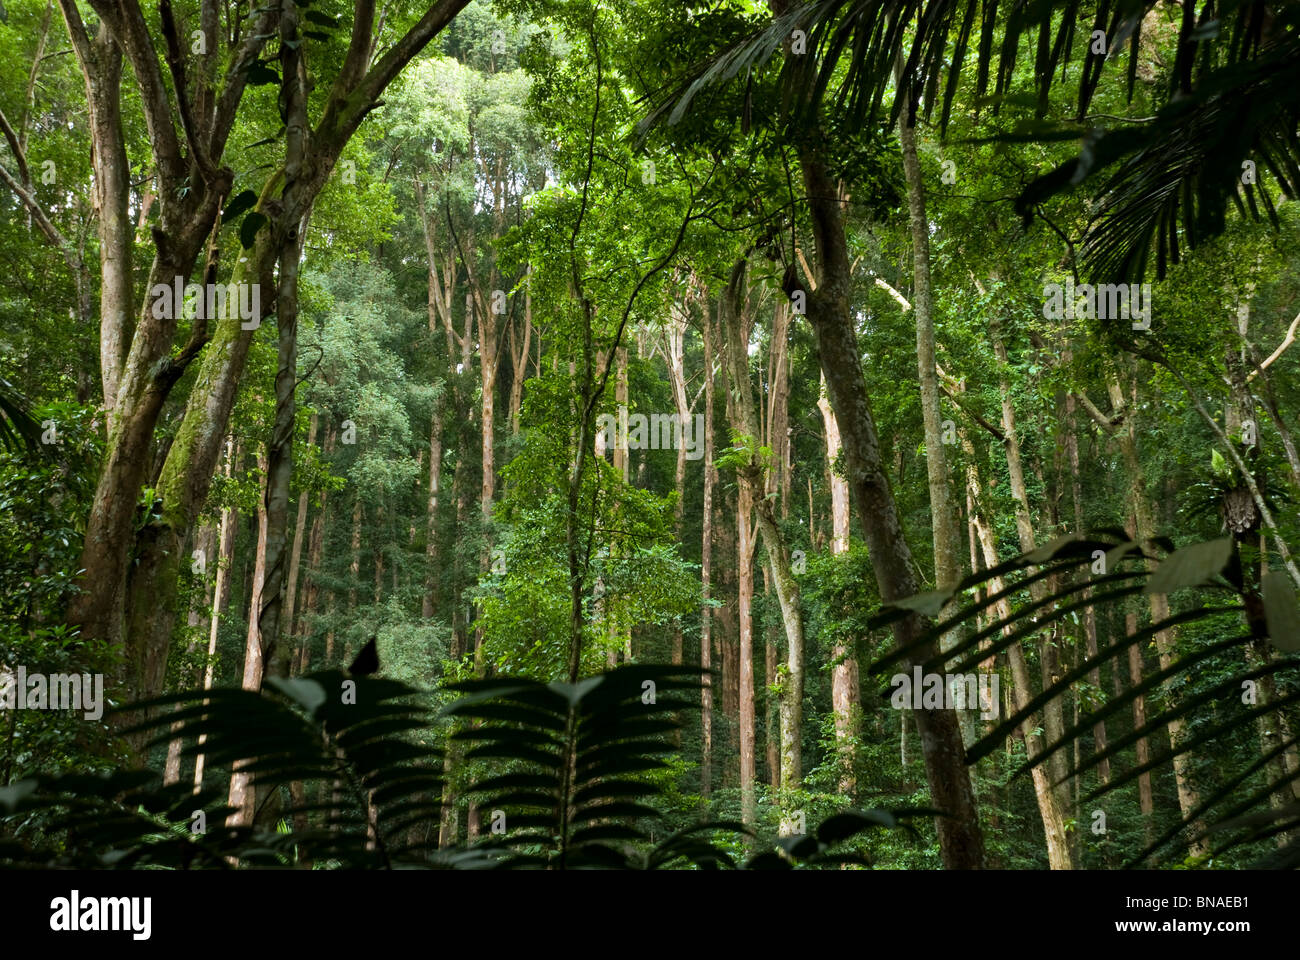 Tropical rainforest in Malaysia Stock Photo